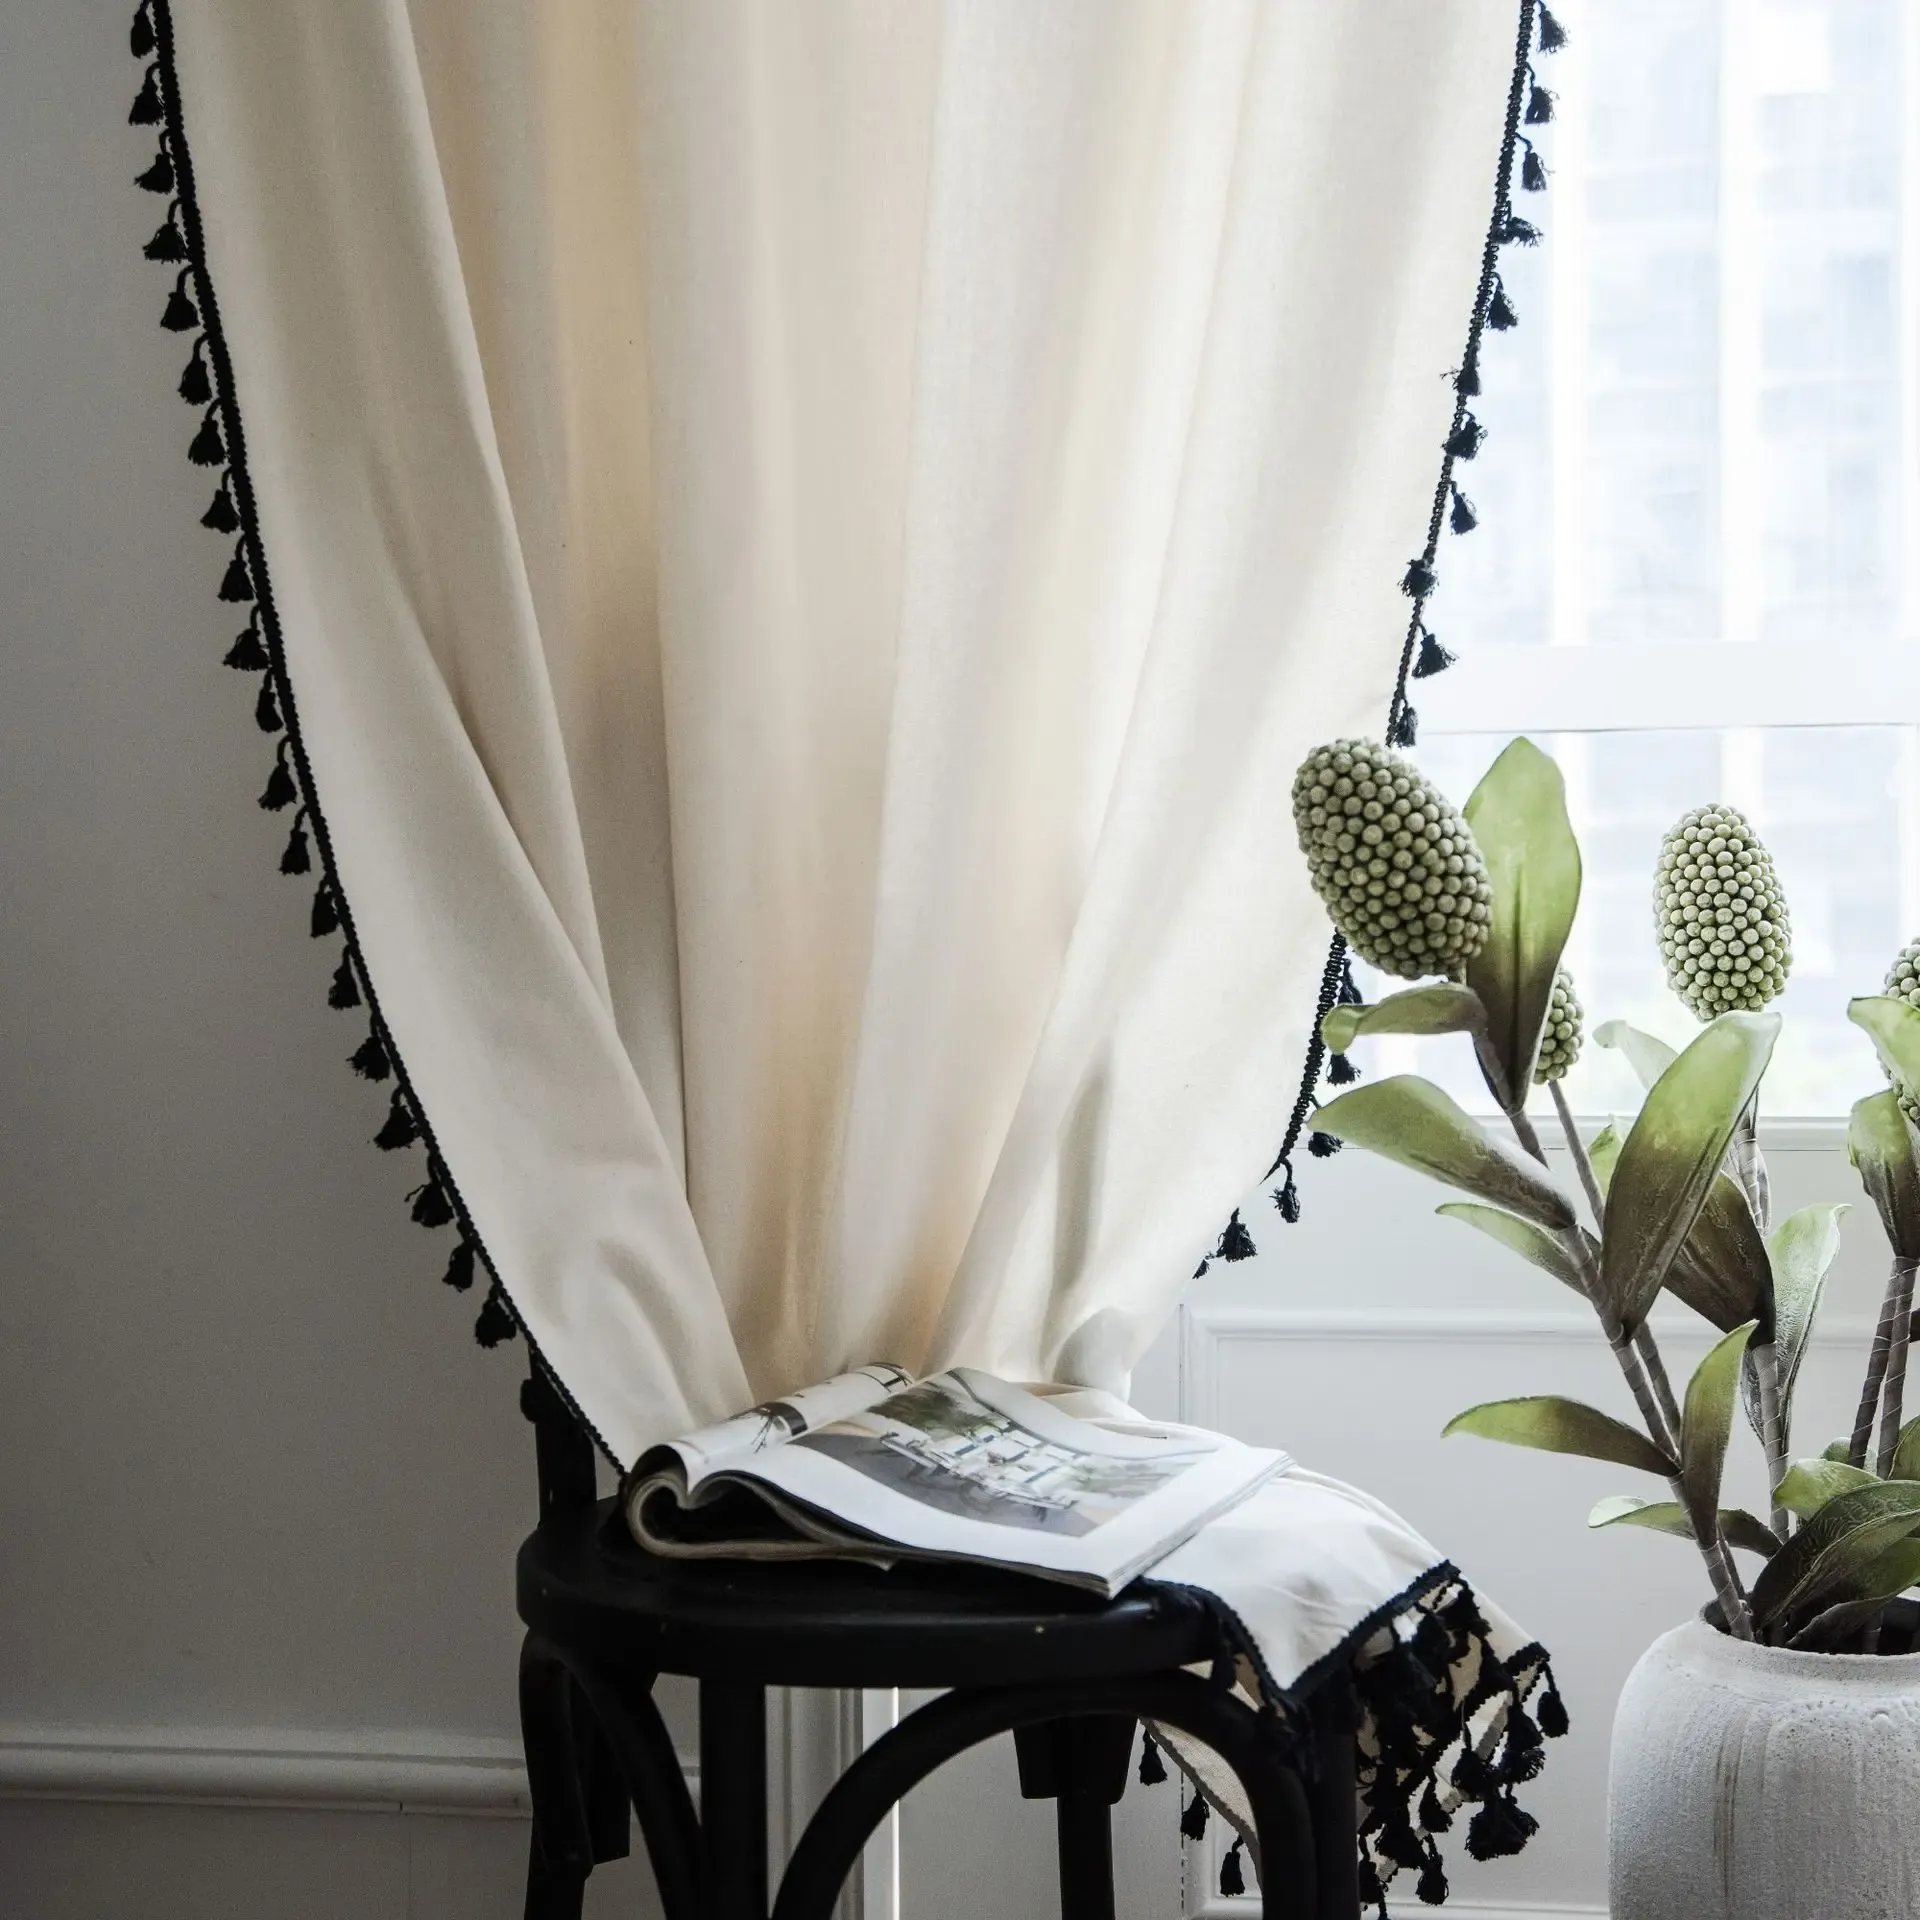 Curtains Solid Color Tassel Curtains Semi Blackout Cotton Blend Farmhouse Boho Style Window Drap SemiSheer Curtains Living Room Bedroom